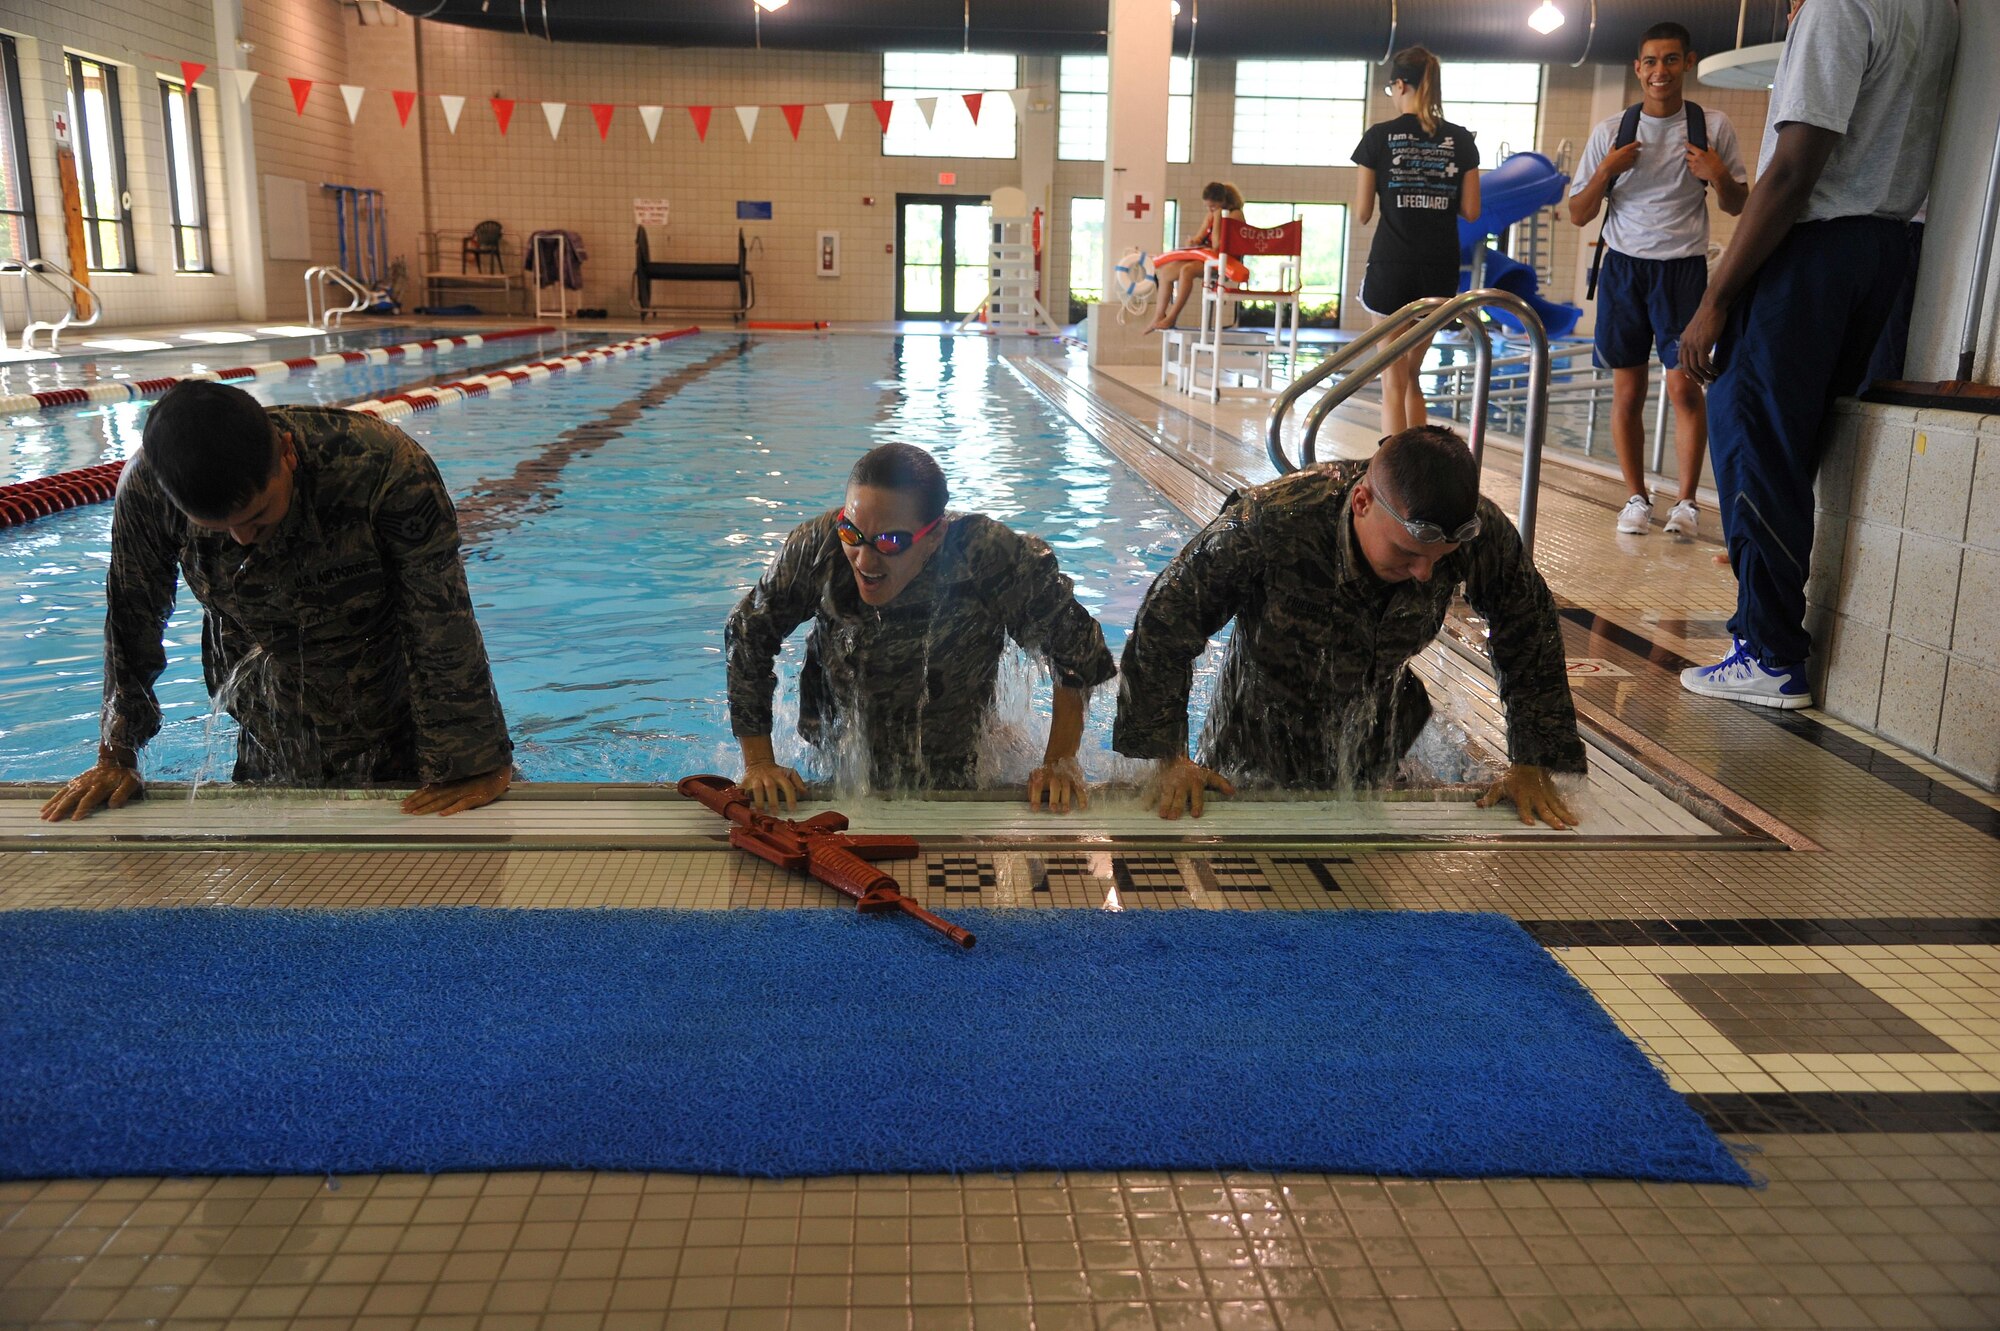 Airmen from the 319th Medical Group participate in the combat swim event during Summer Bash, August 12, 2016 on Grand Forks Air Force Base, N.D. A team of three swim in ABUs, while holding a simulated rifle from one end of the pool to the other. (U.S. Air Force Photo by A1C Elijaih Tiggs/released)